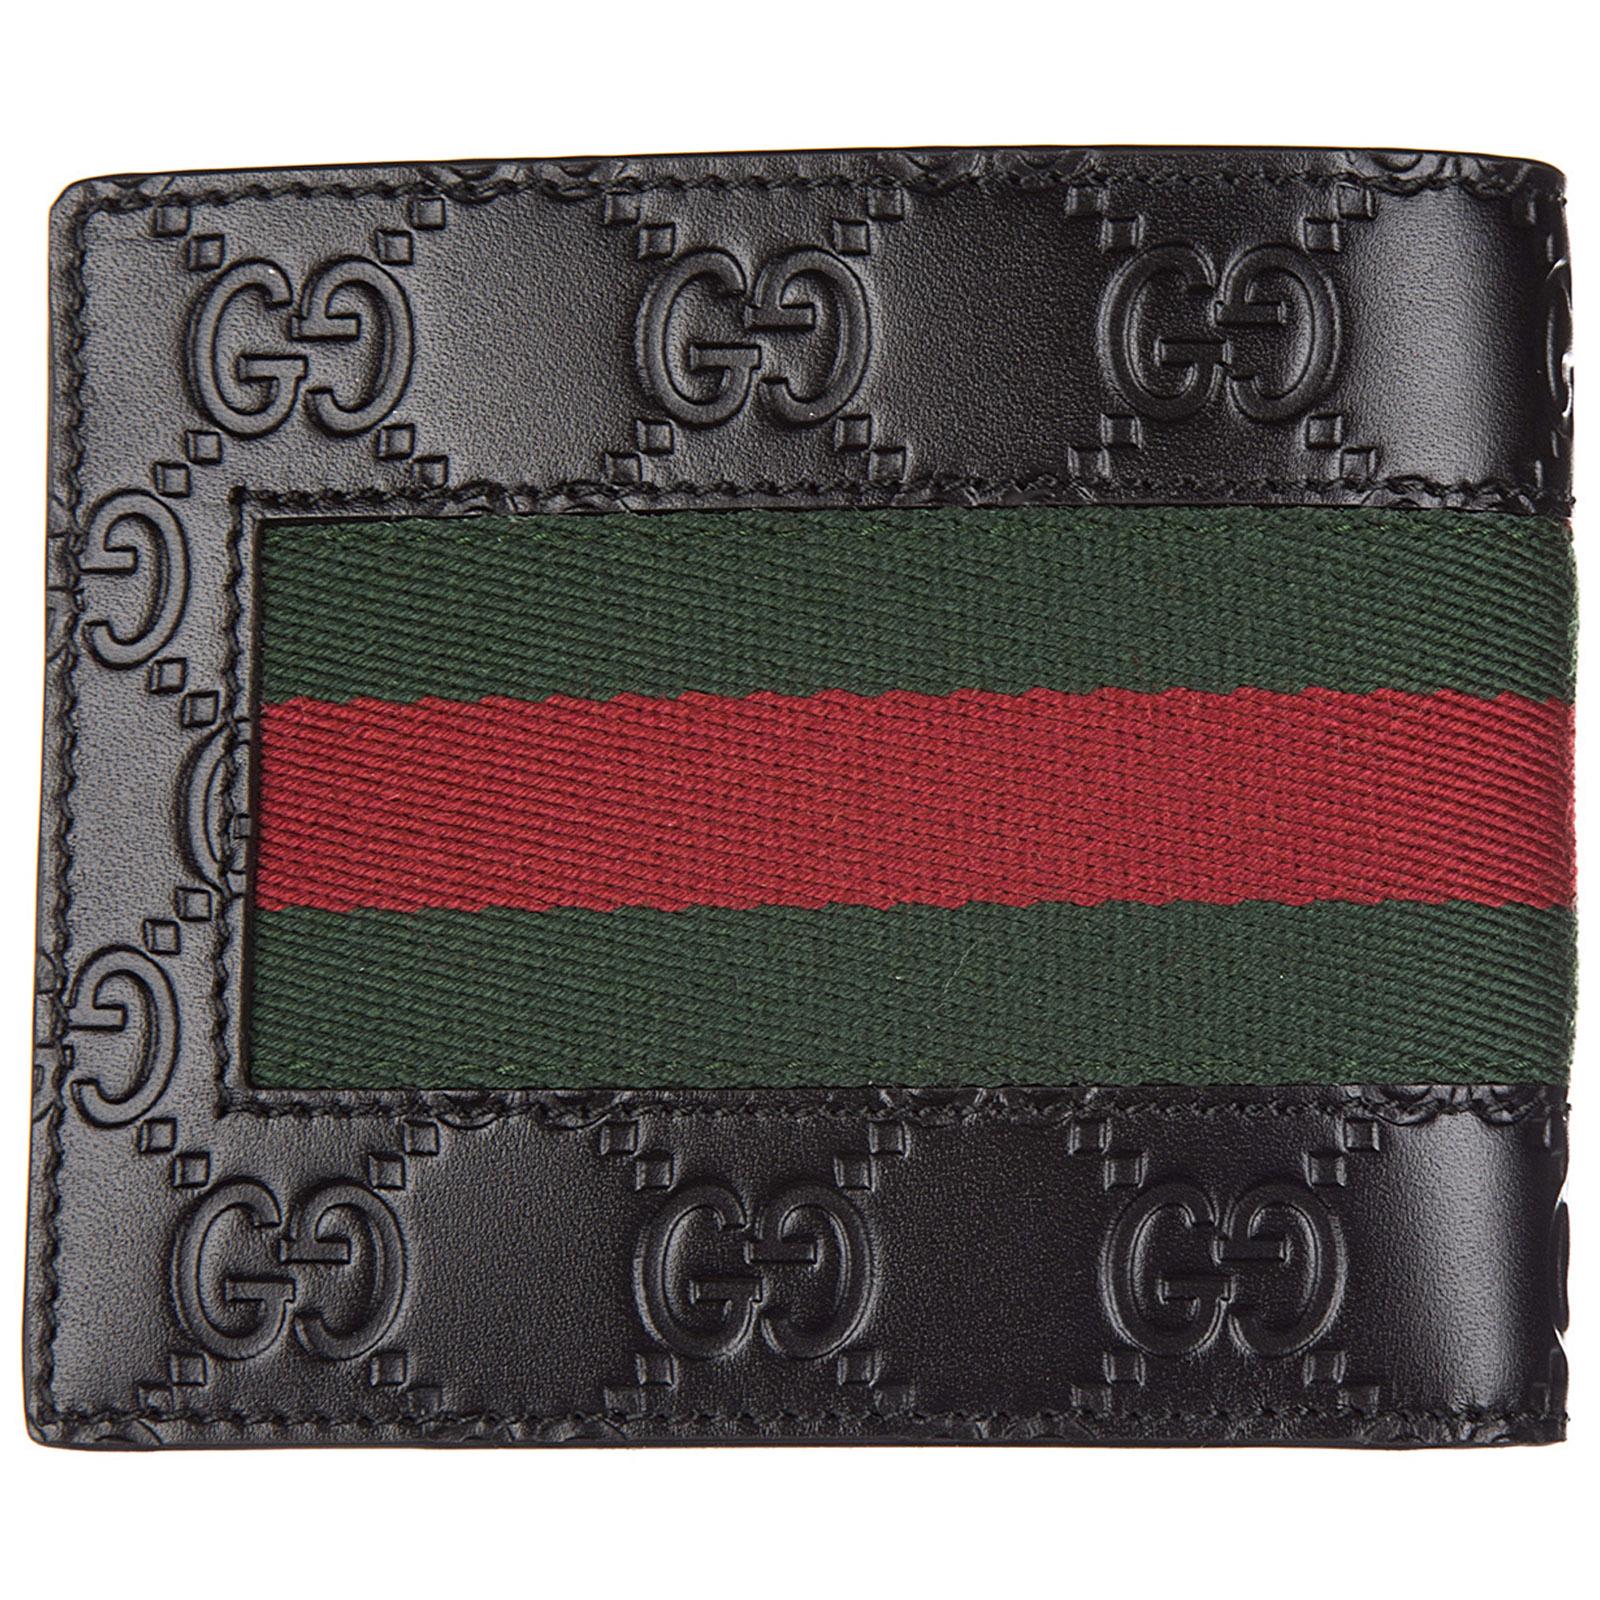  Gucci  Men s  Genuine Leather Wallet  Credit Card  Bifold 